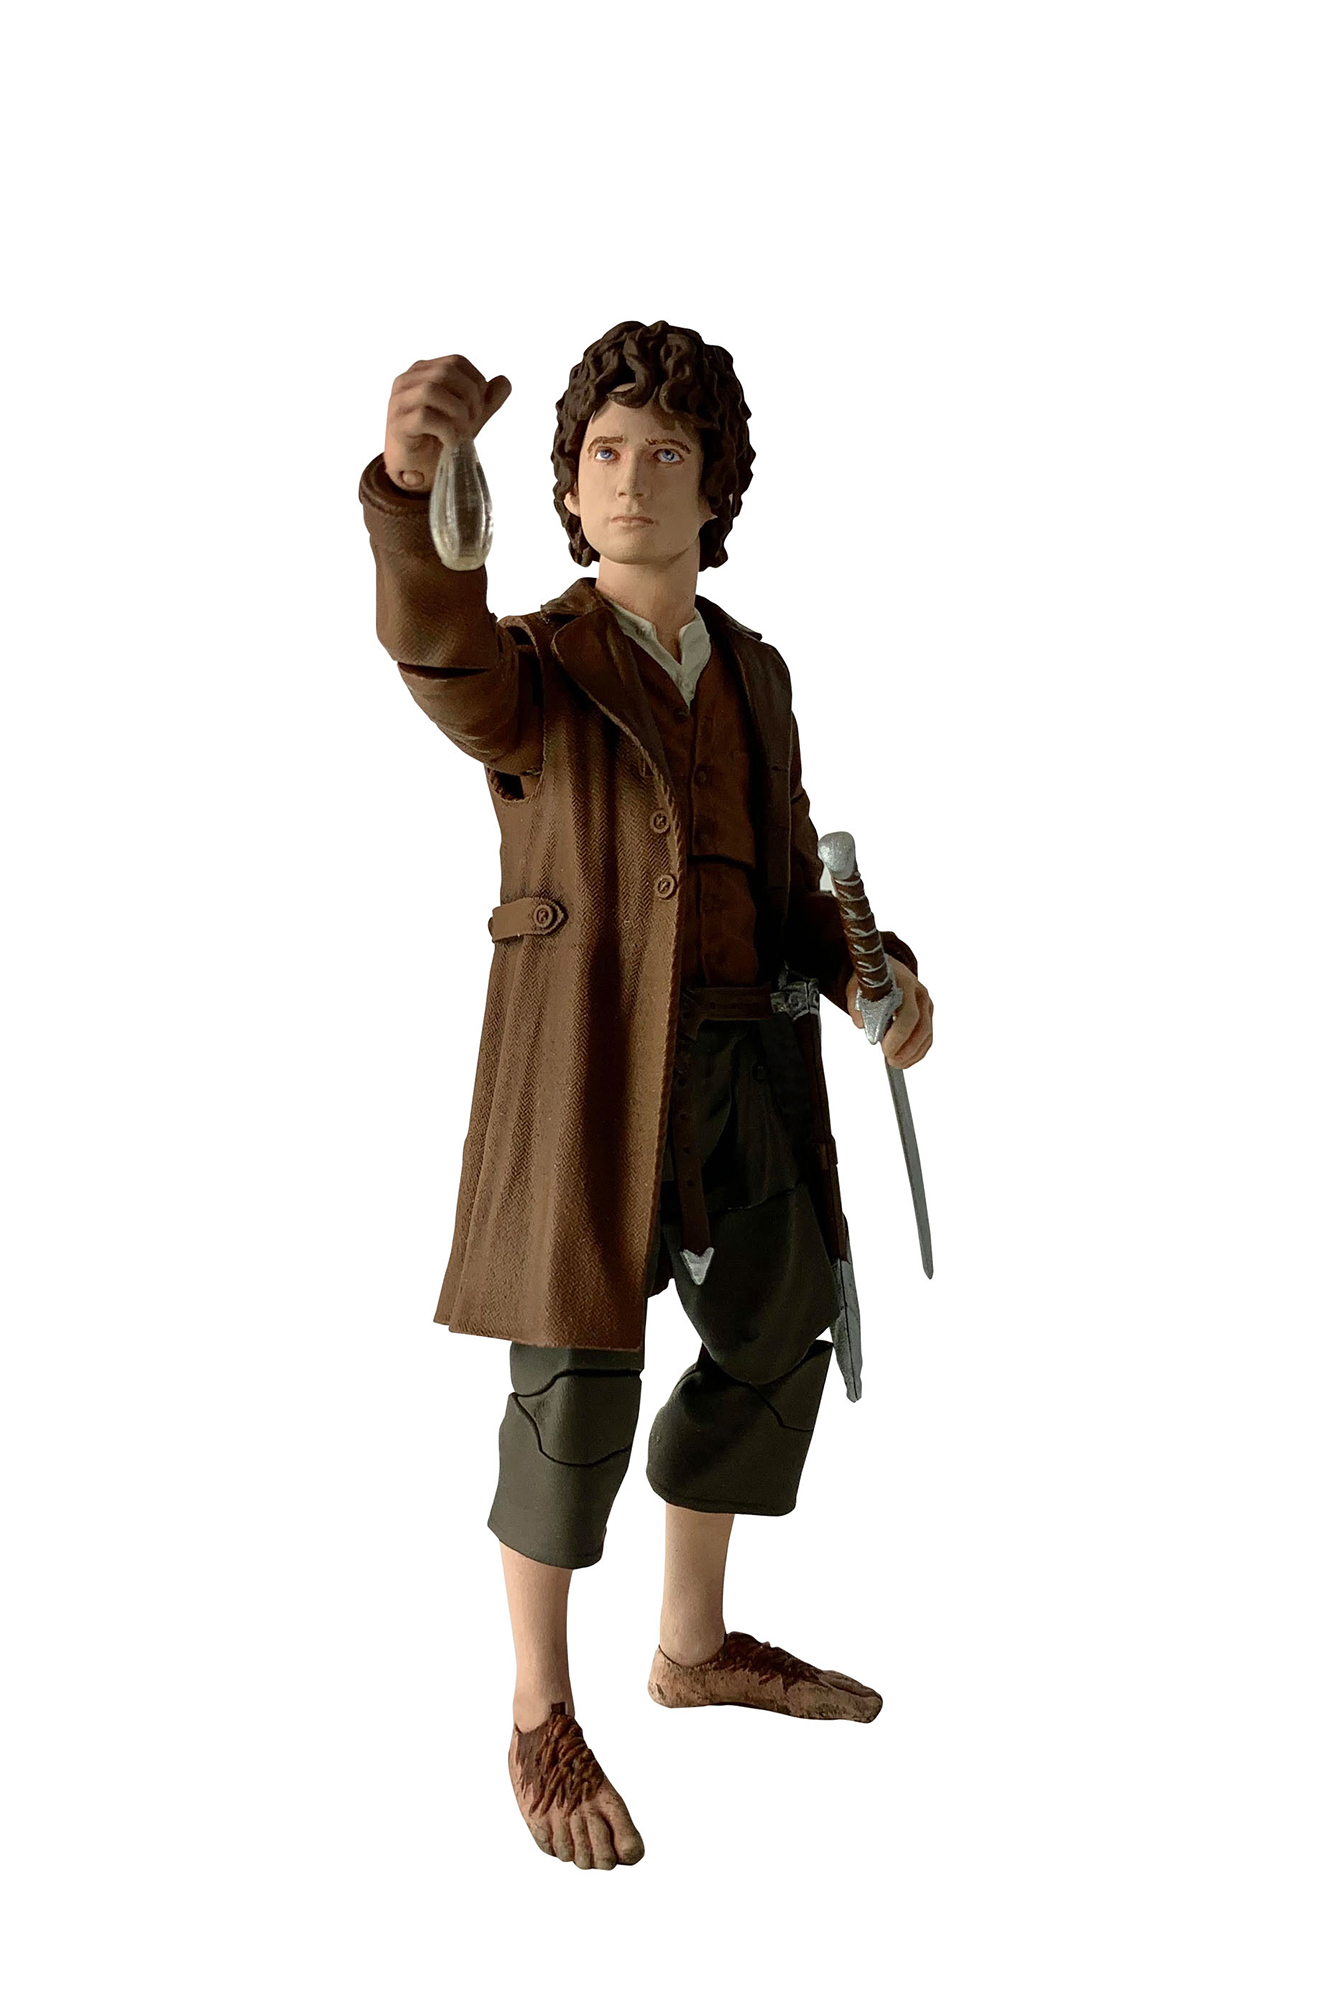 Lord of the Rings DLX Series 2 Frodo 7 Inch Scale Action Figure